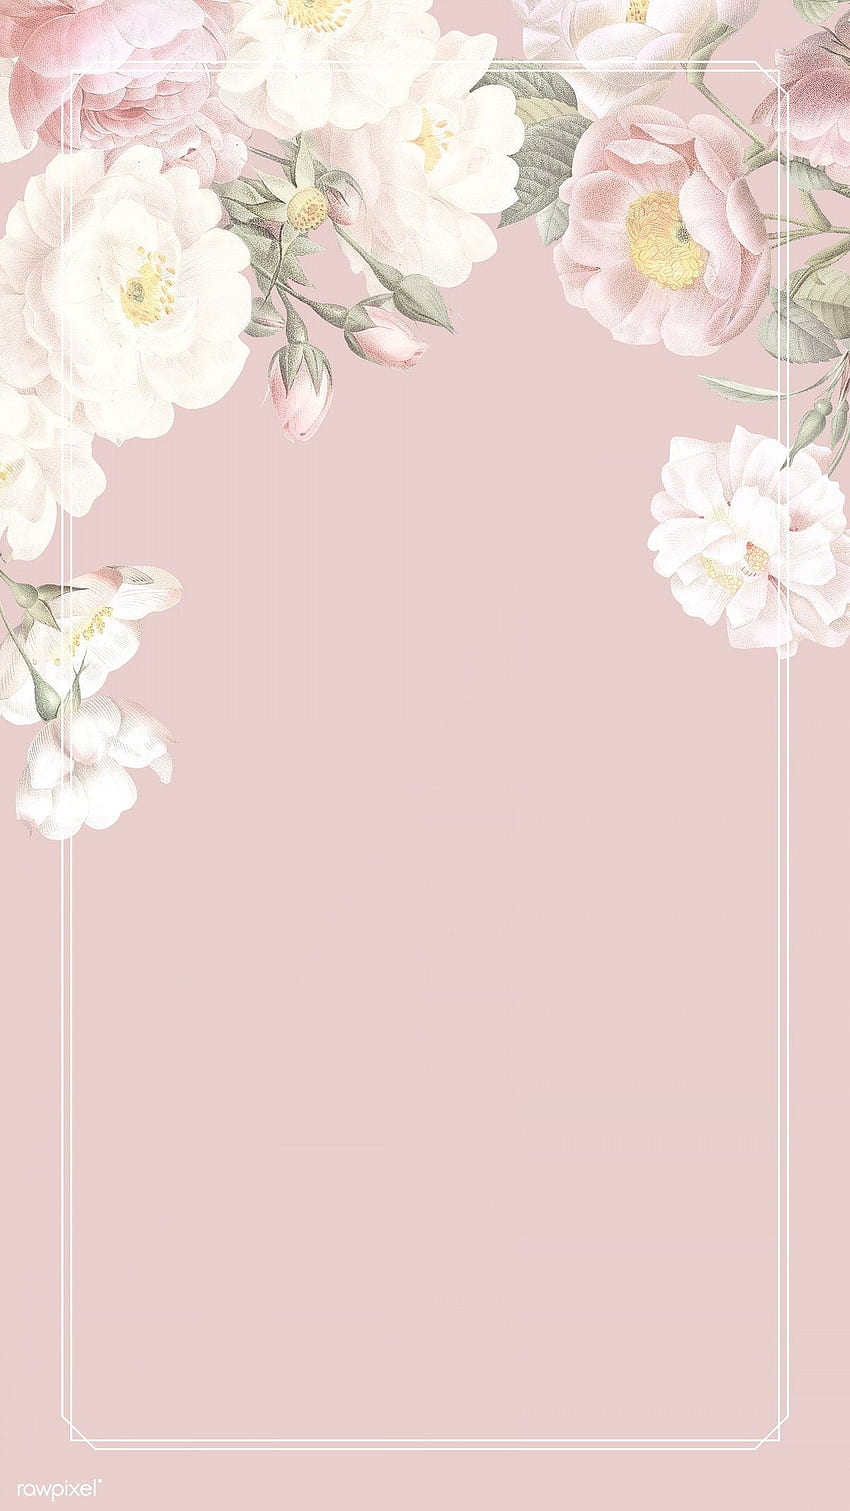 Free Vector Pastel Floral Background Vector Art  Graphics  freevectorcom